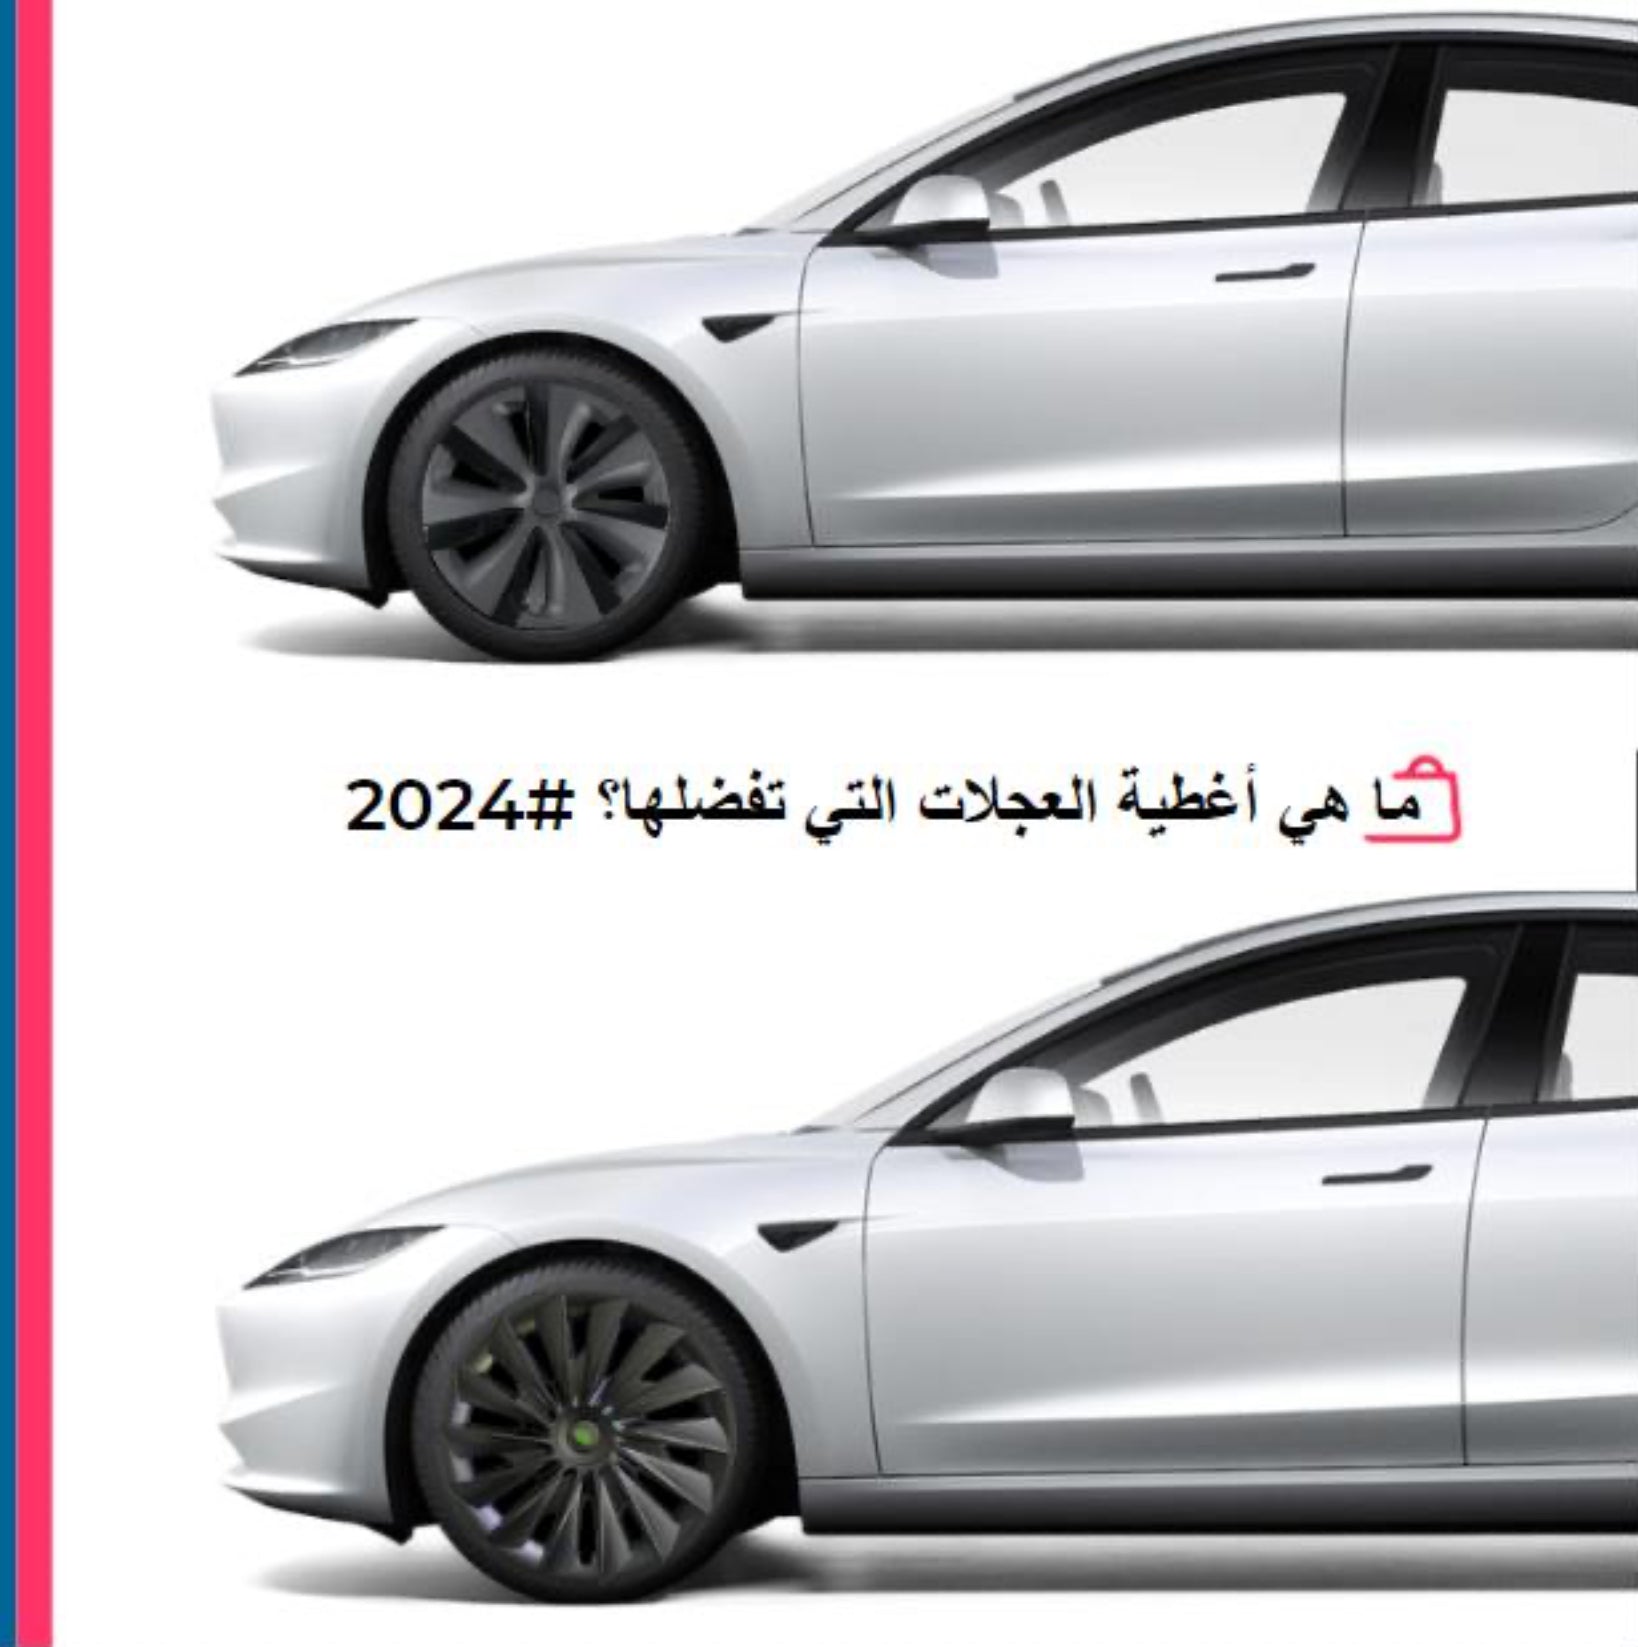 Showcasing a side-by-side comparison of a silver Tesla car with standard wheels and the same car upgraded with sportier Clevisco wheels, highlighting the enhanced performance and style as part of the Tesla accessories range.